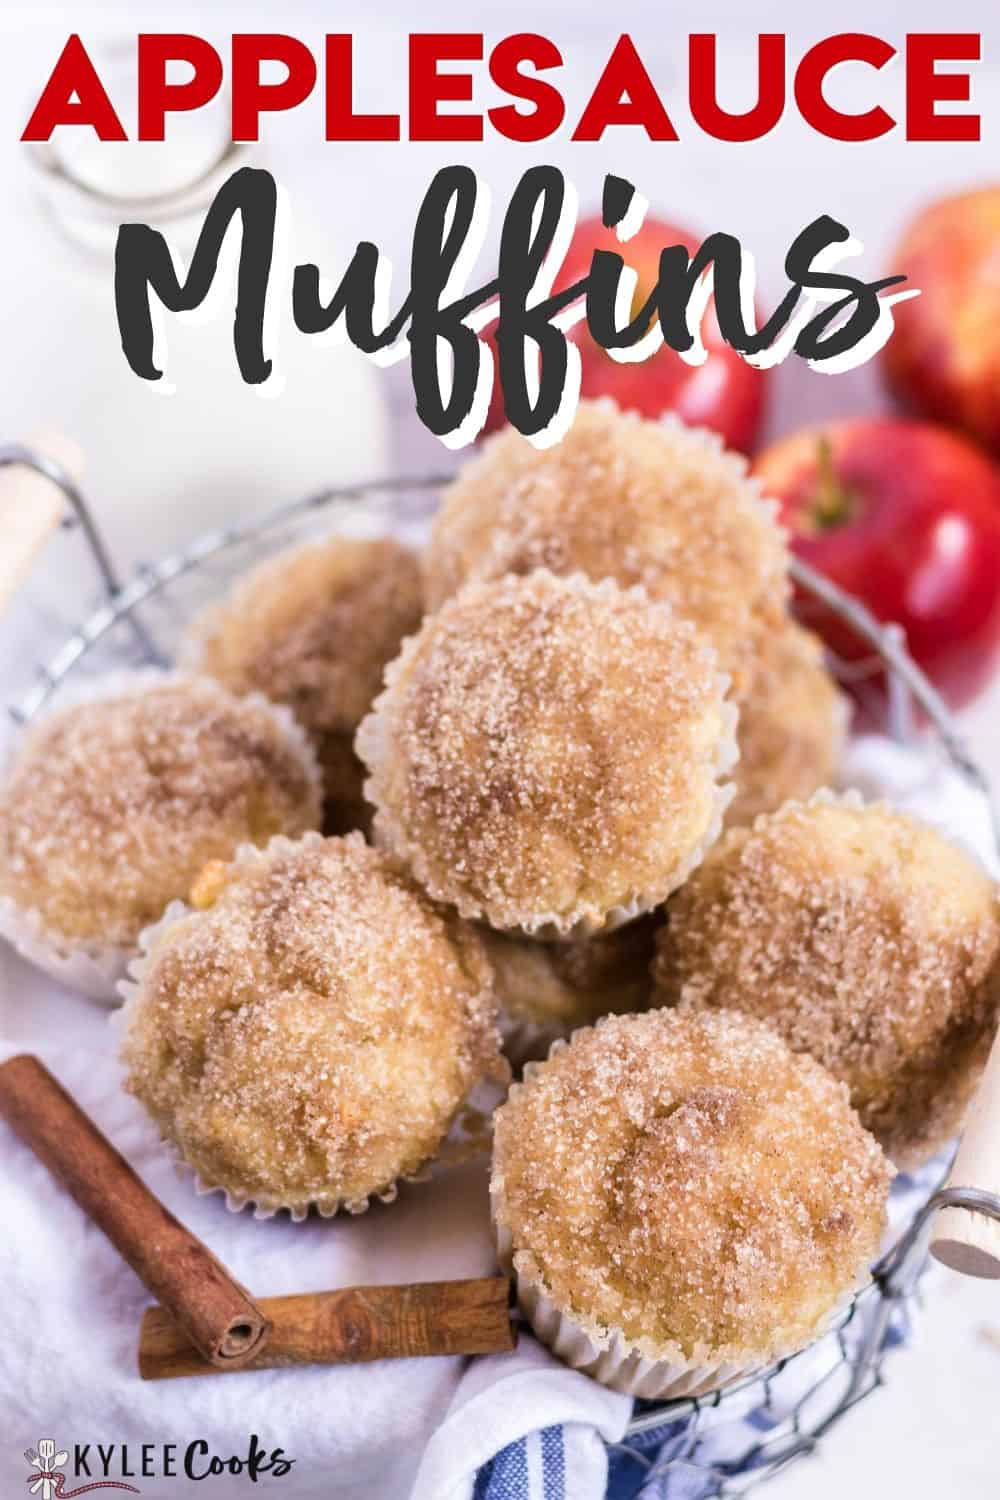 applesauce muffins with recipe text overlaid